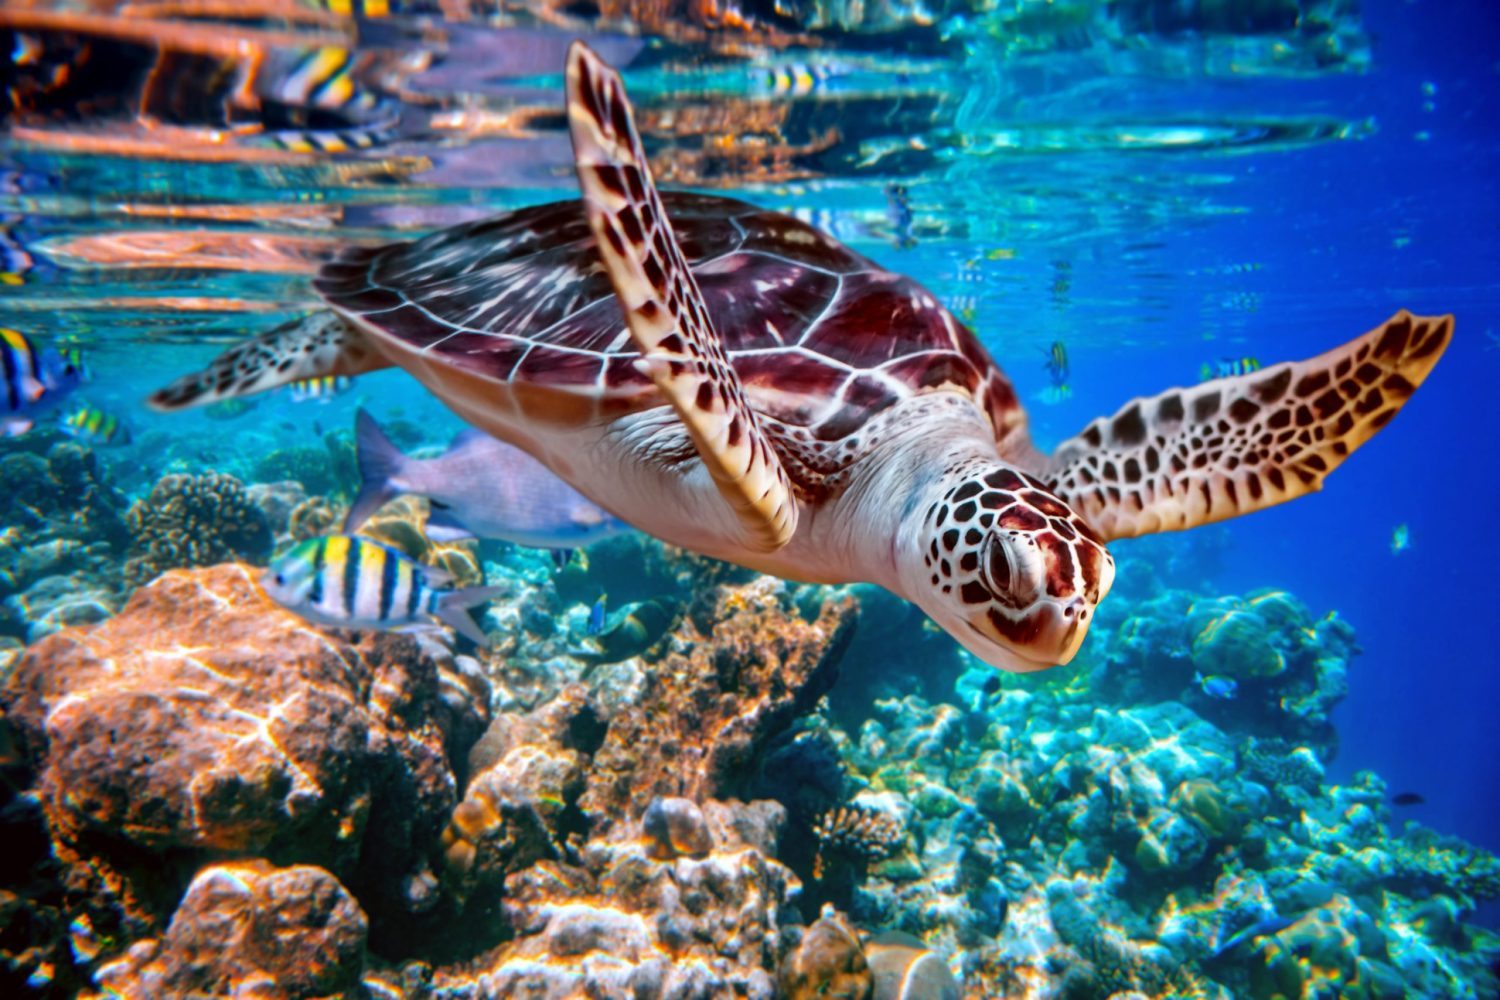 ea turtle swims under water on the background of coral reefs